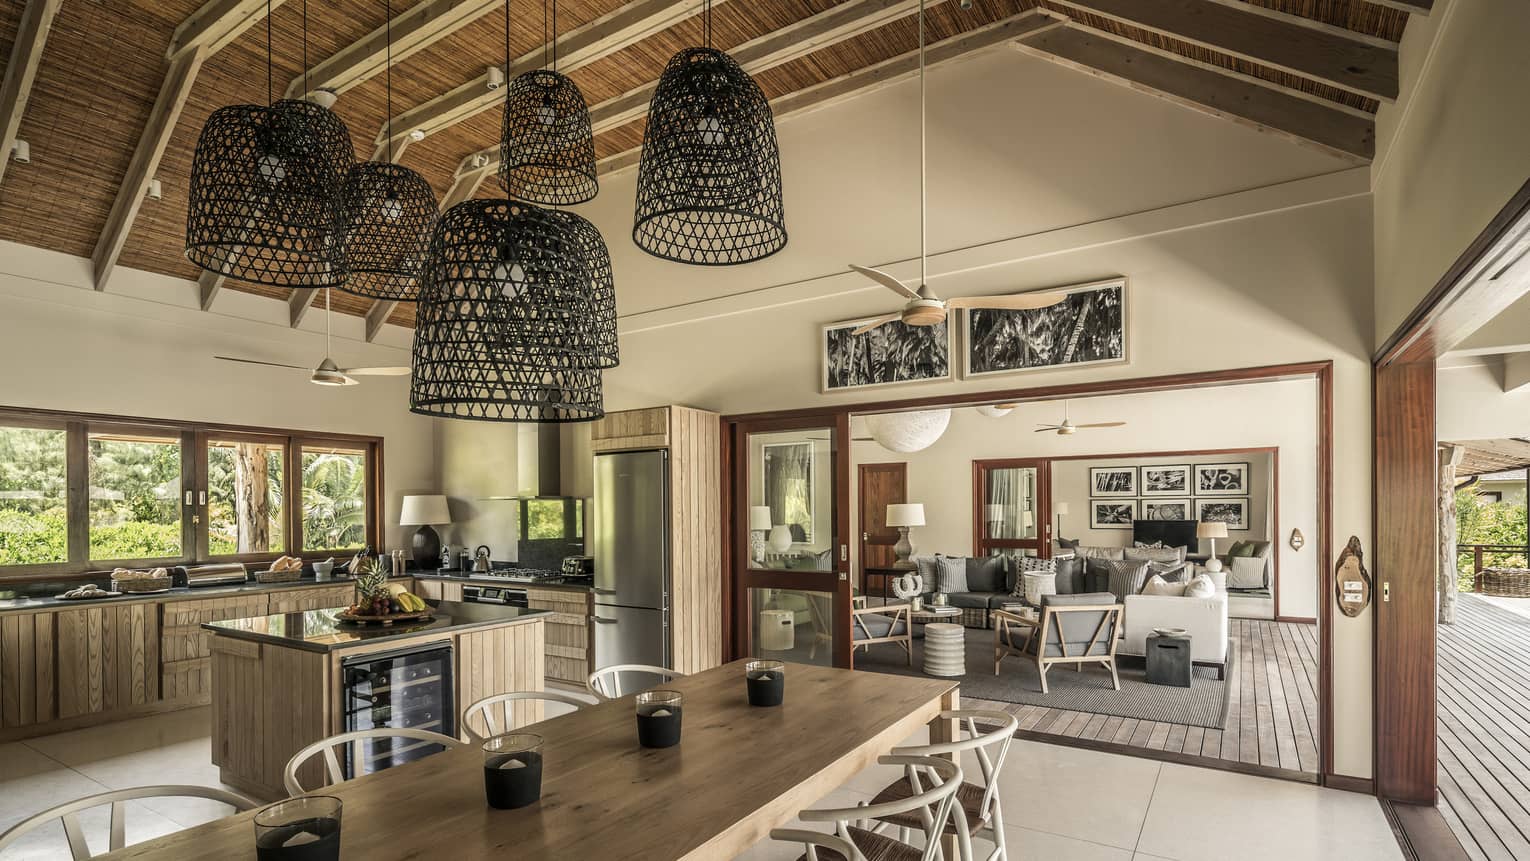 Large basket-like chandeliers hang from gambrel roof over long wood dining table, large kitchen